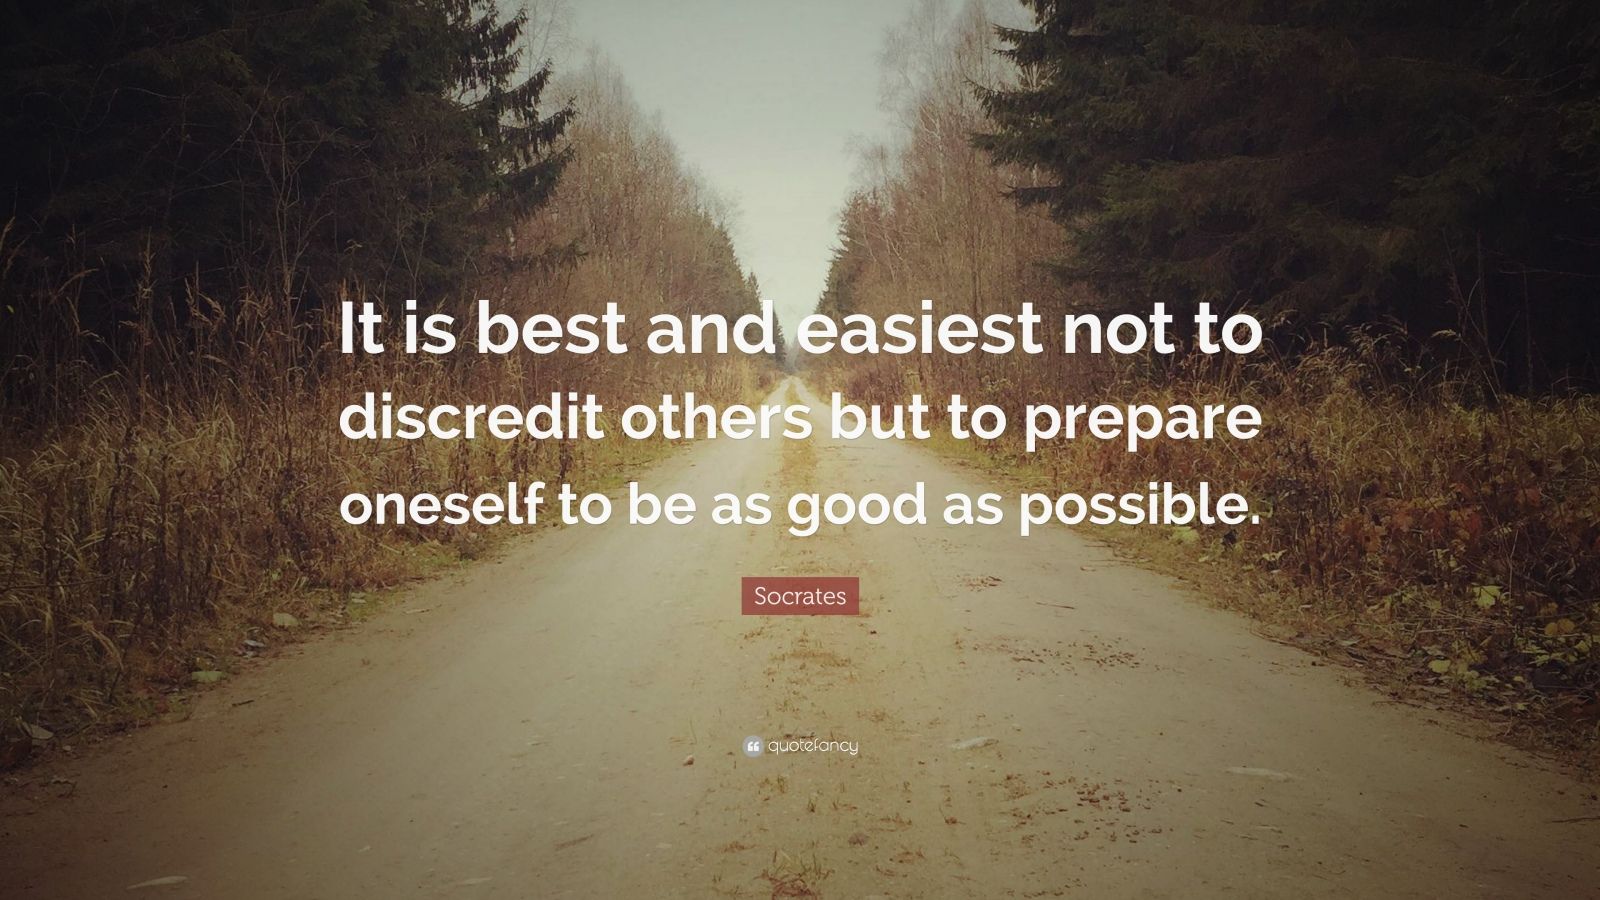 Socrates Quote “It is best and easiest not to discredit others but to prepare